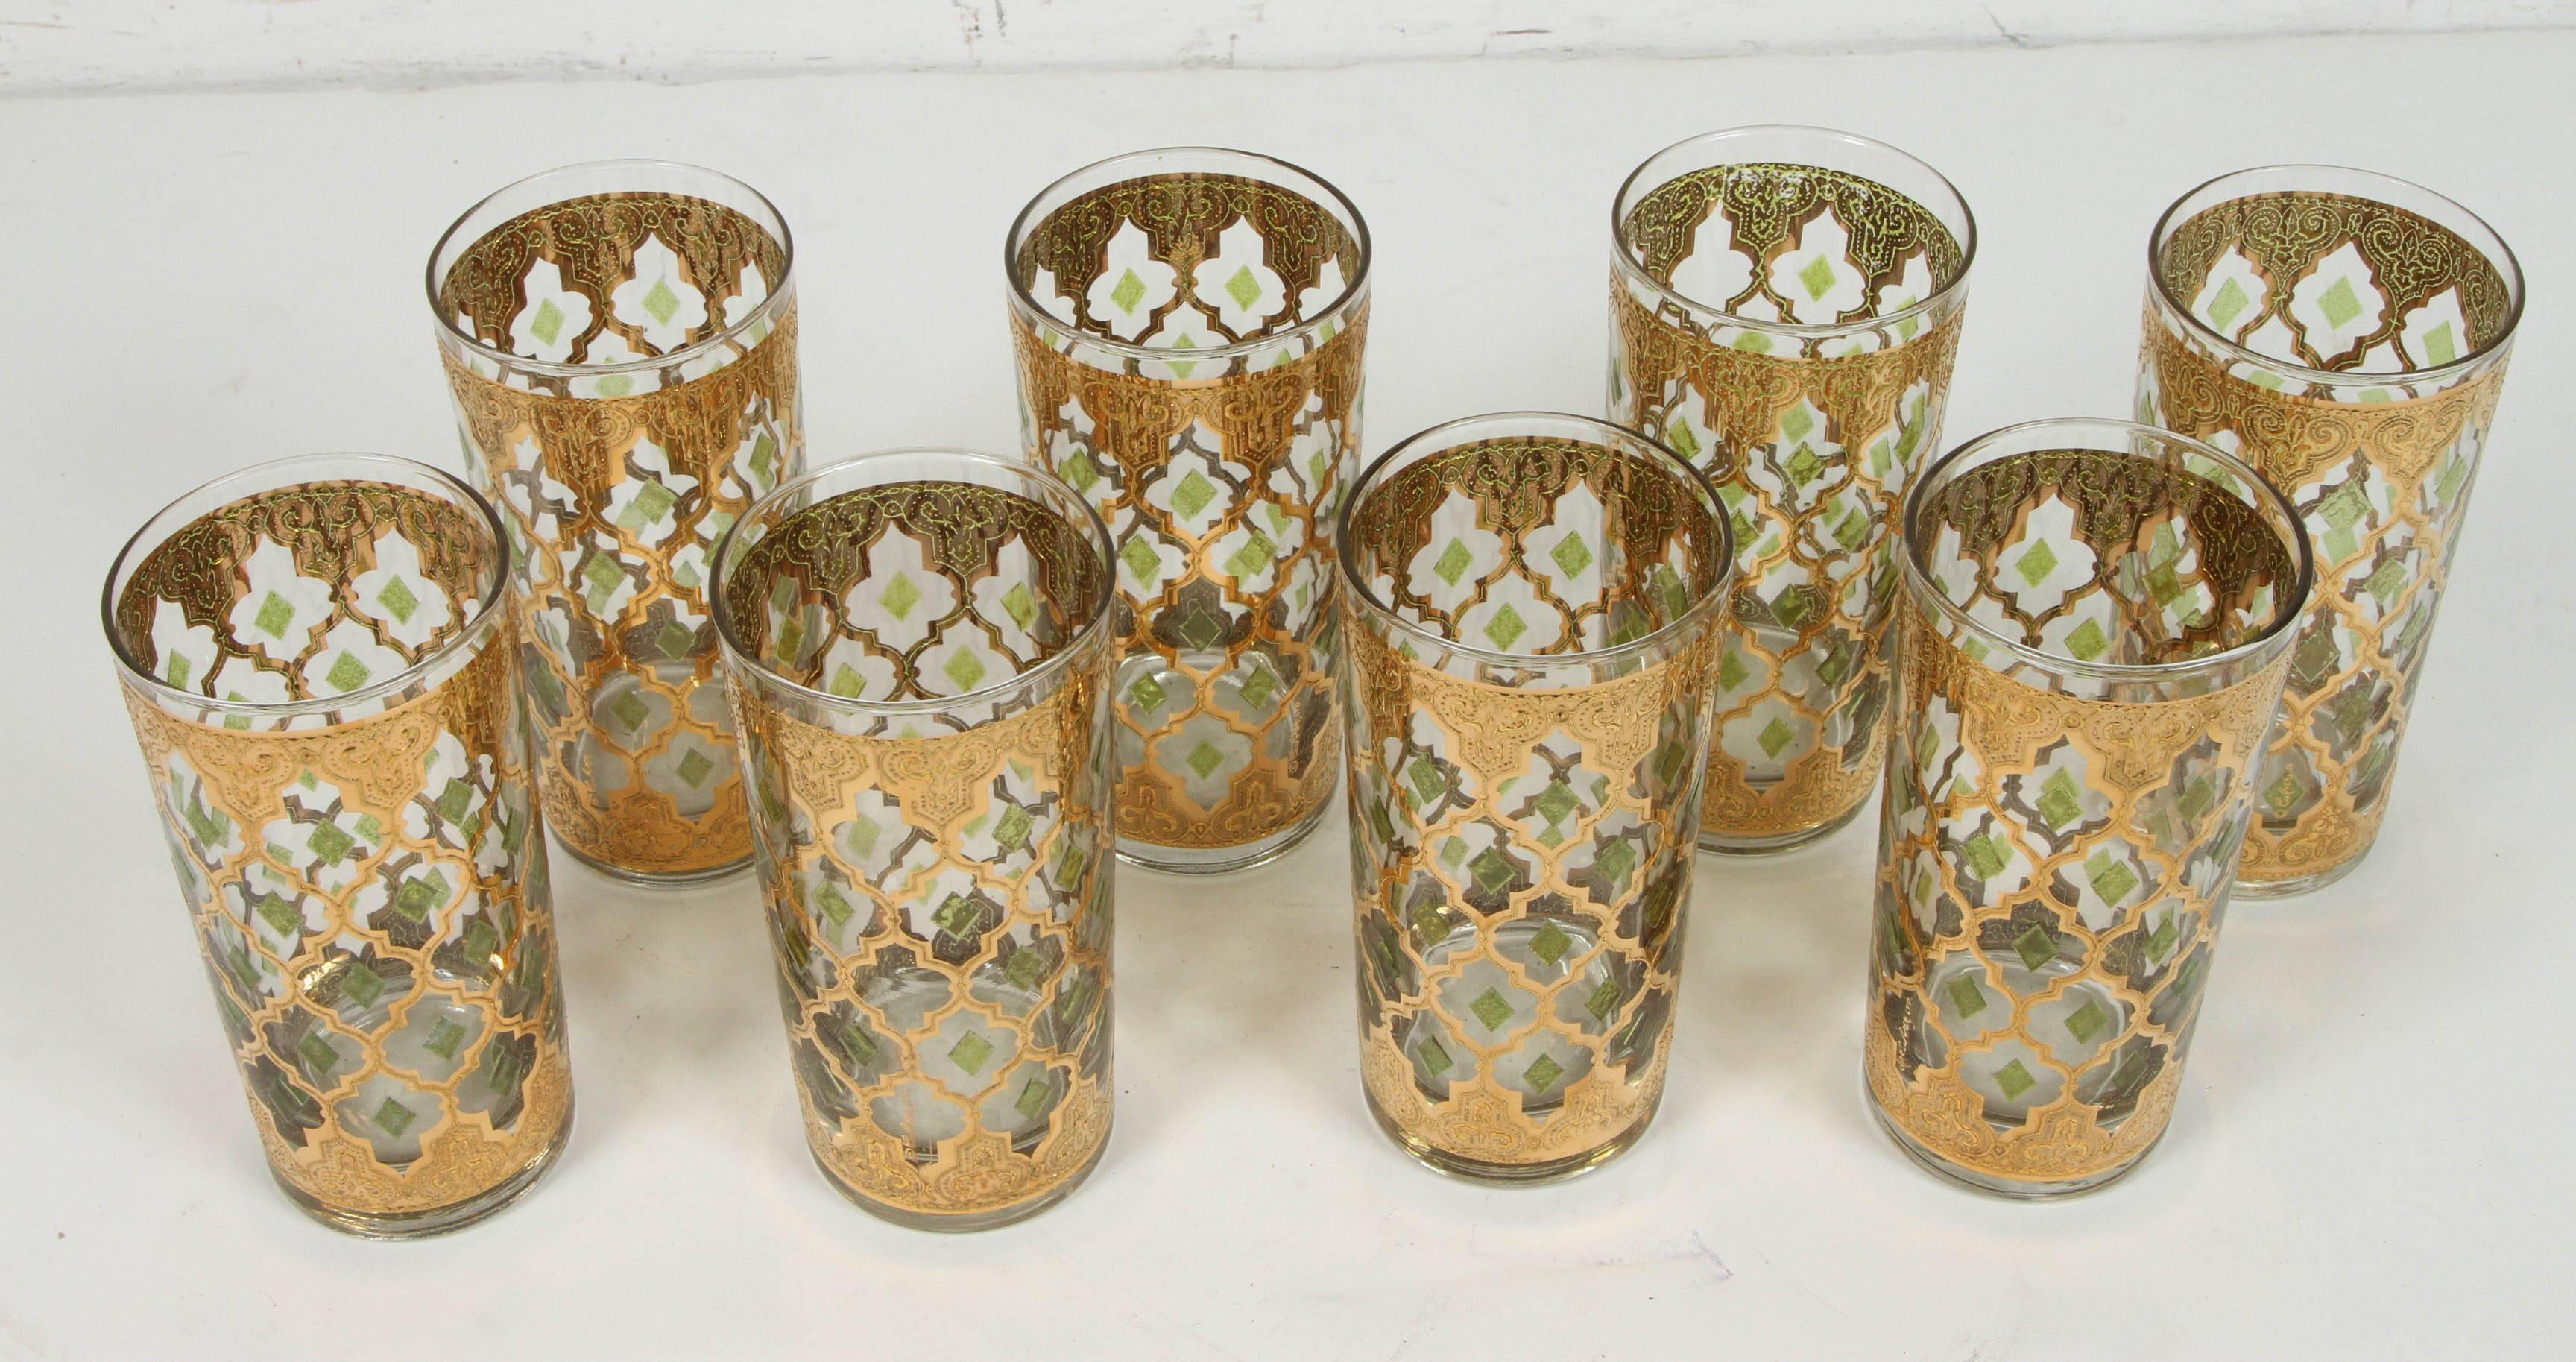 Elegant vintage midcentury Culver barware glasses with Valencia pattern in a gold leaf finish.
Set includes 8 Culver highball glasses in Valencia Moorish style design.
This fabulous vintage Culver set of barware with 22-carat gold decoration is